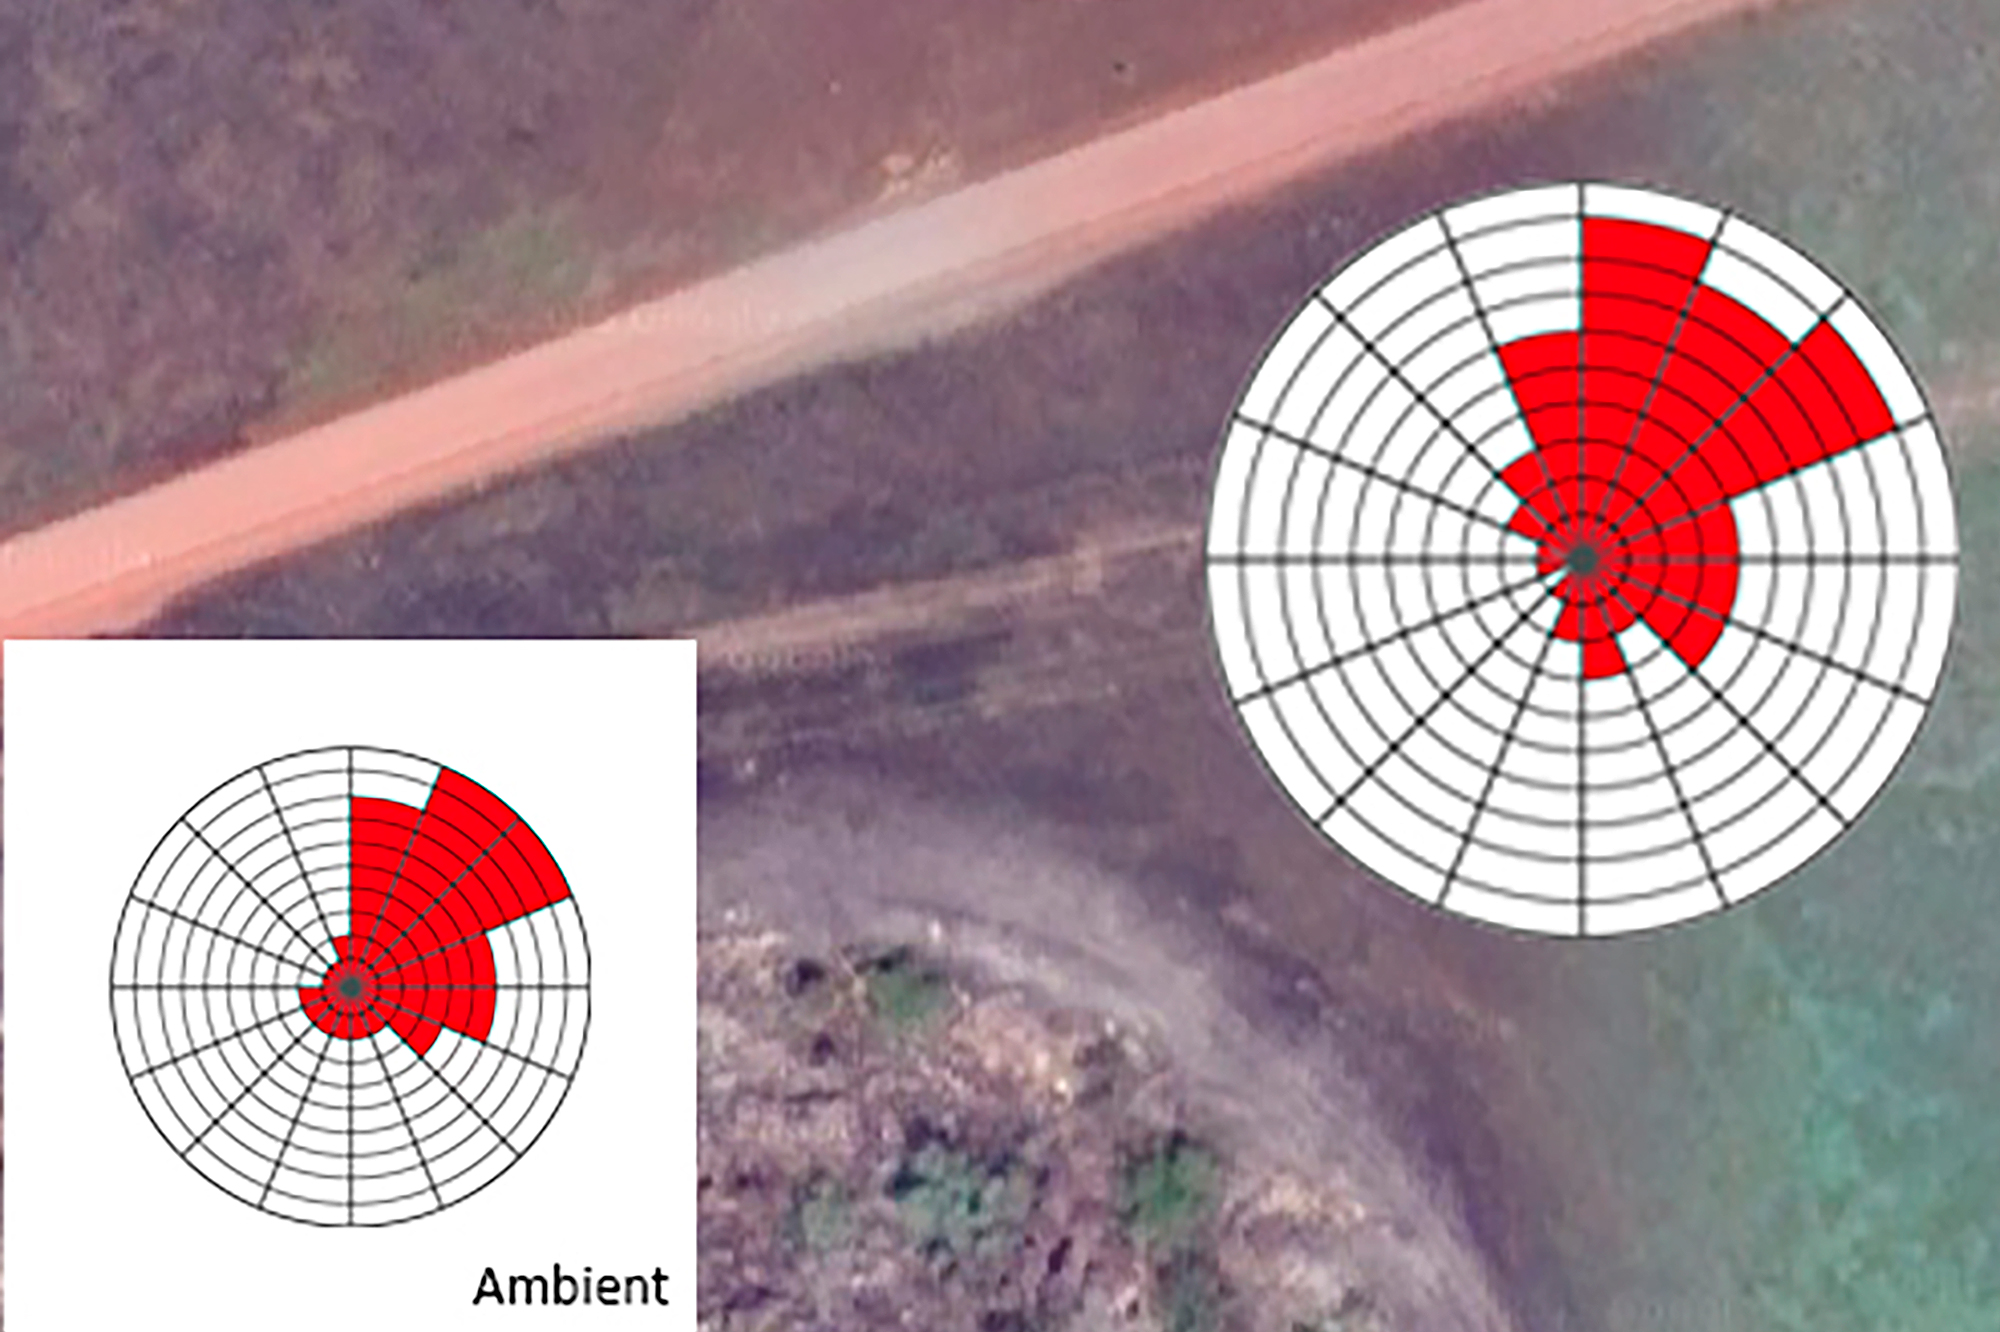 The results from directional samples were plotted as rosette diagrams, giving a clear indication that the Gunbalanya road was the primary source of dust when factoring prevailing wind direction.